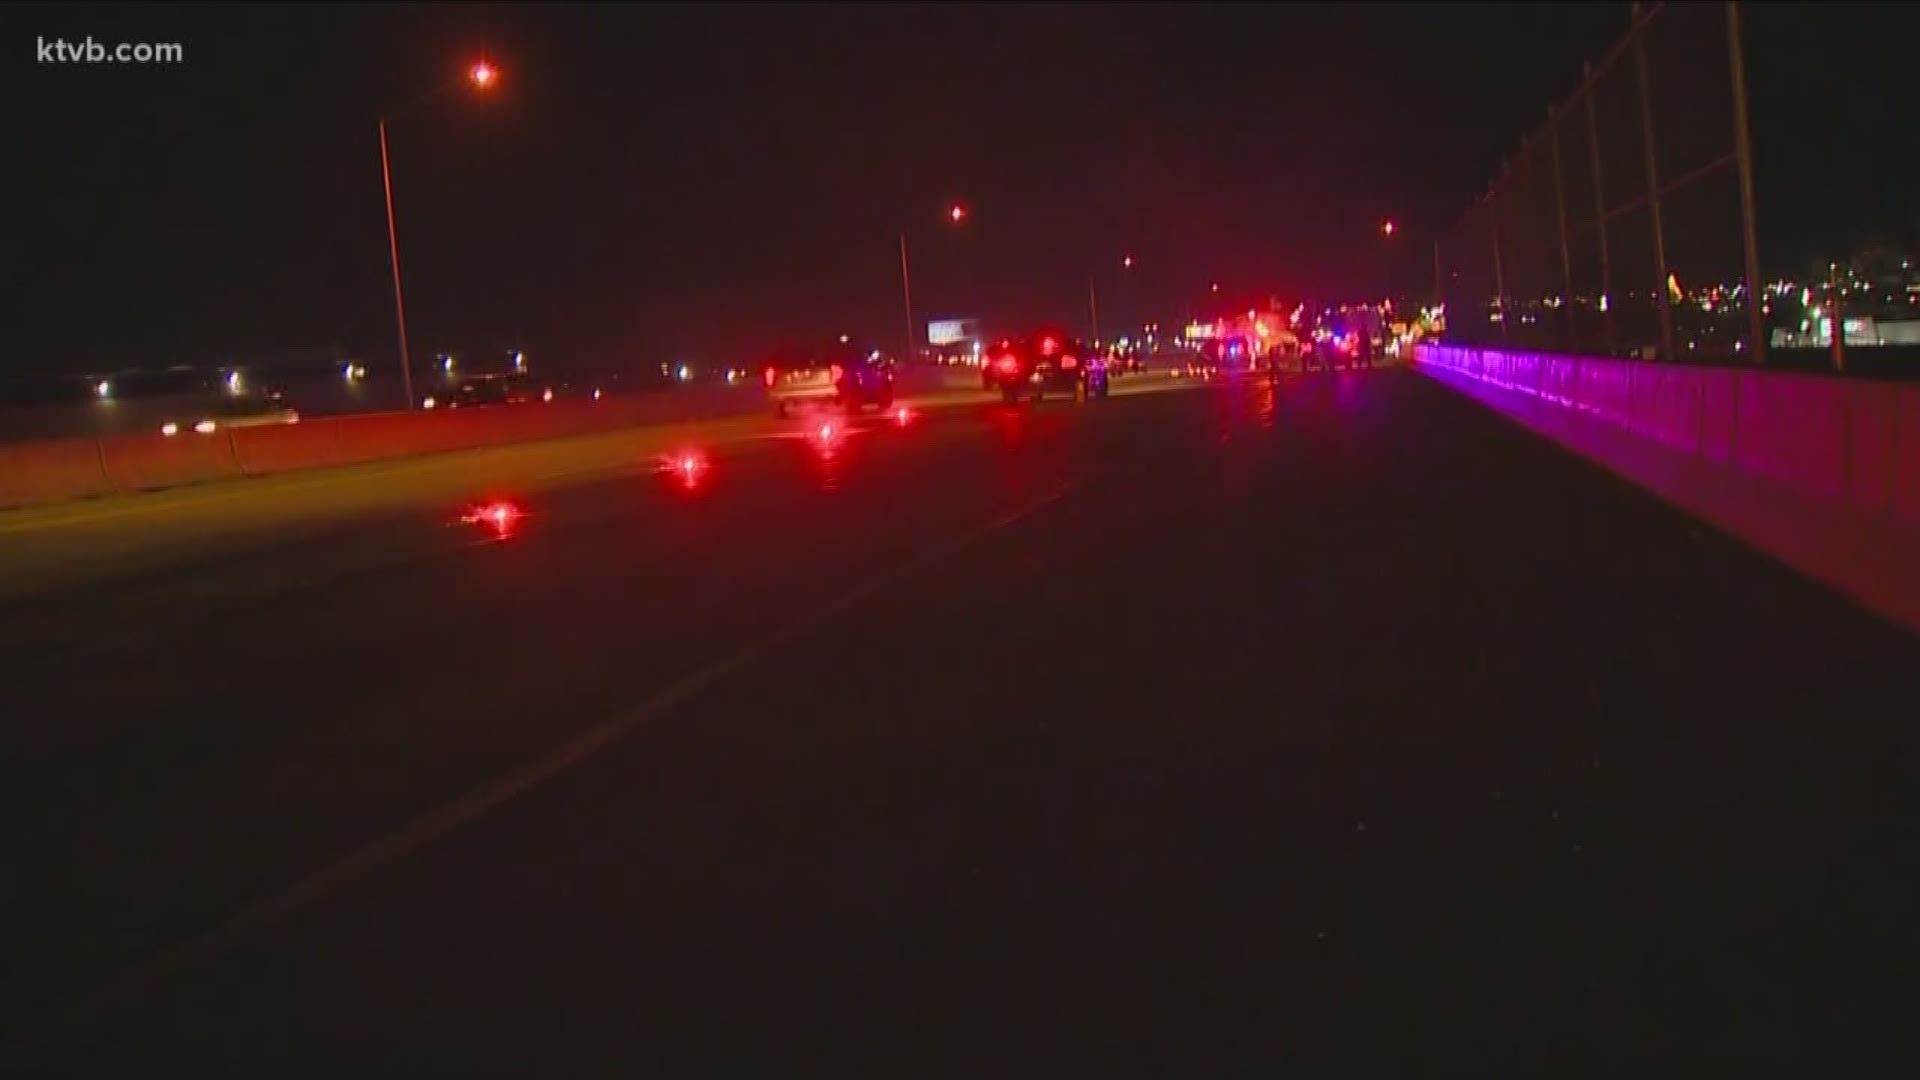 The pedestrian was hit by a truck Friday night.